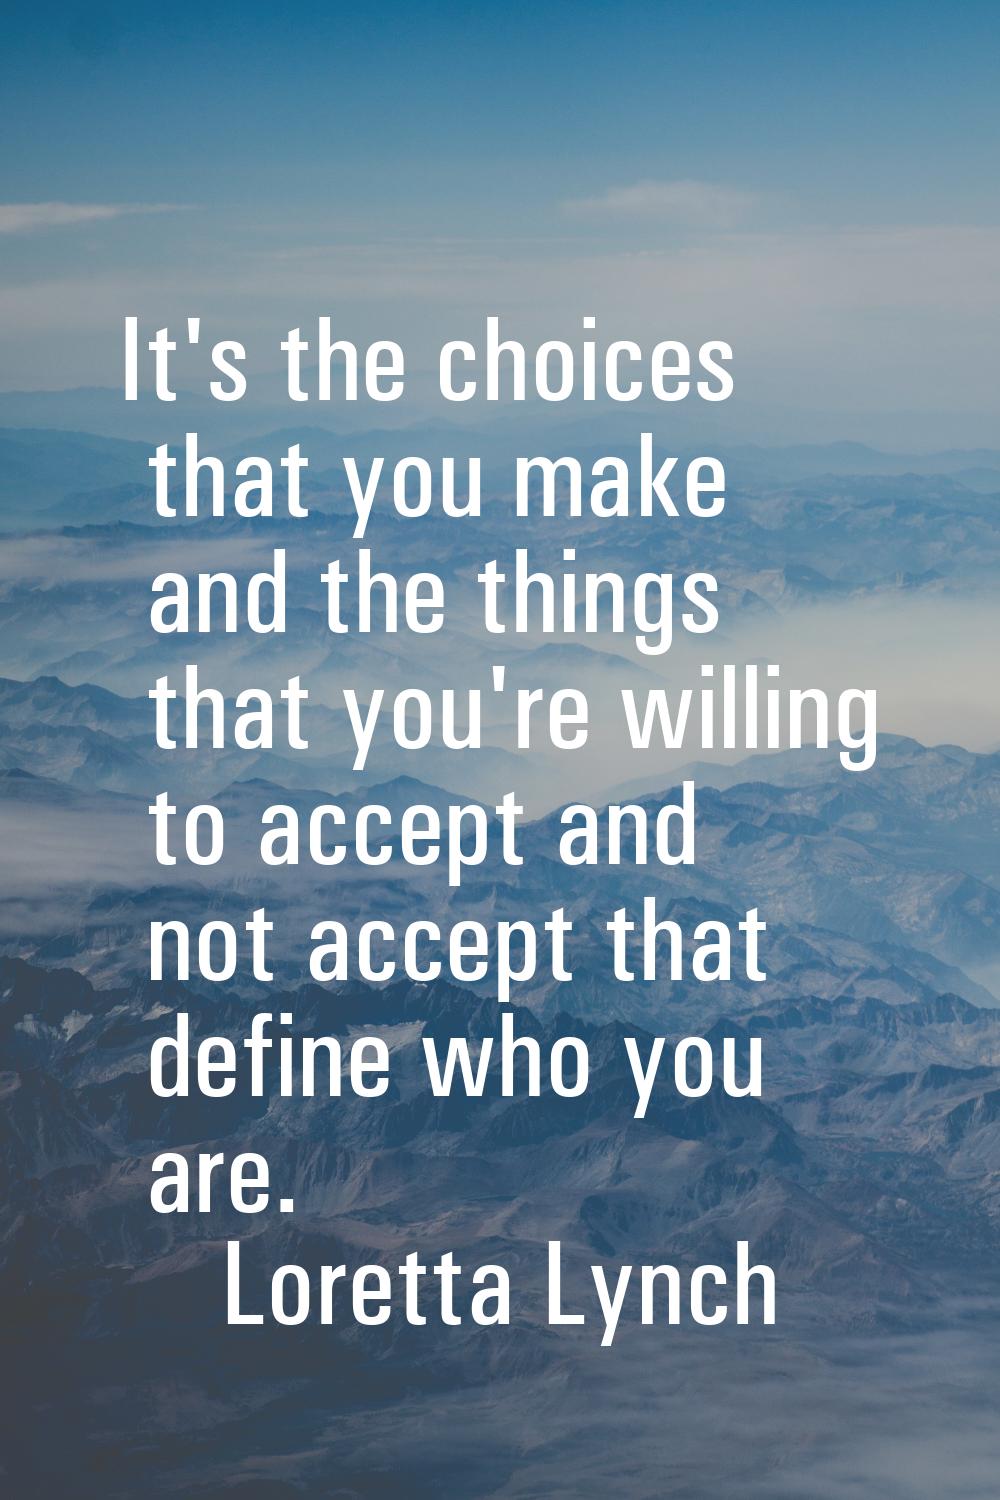 It's the choices that you make and the things that you're willing to accept and not accept that def